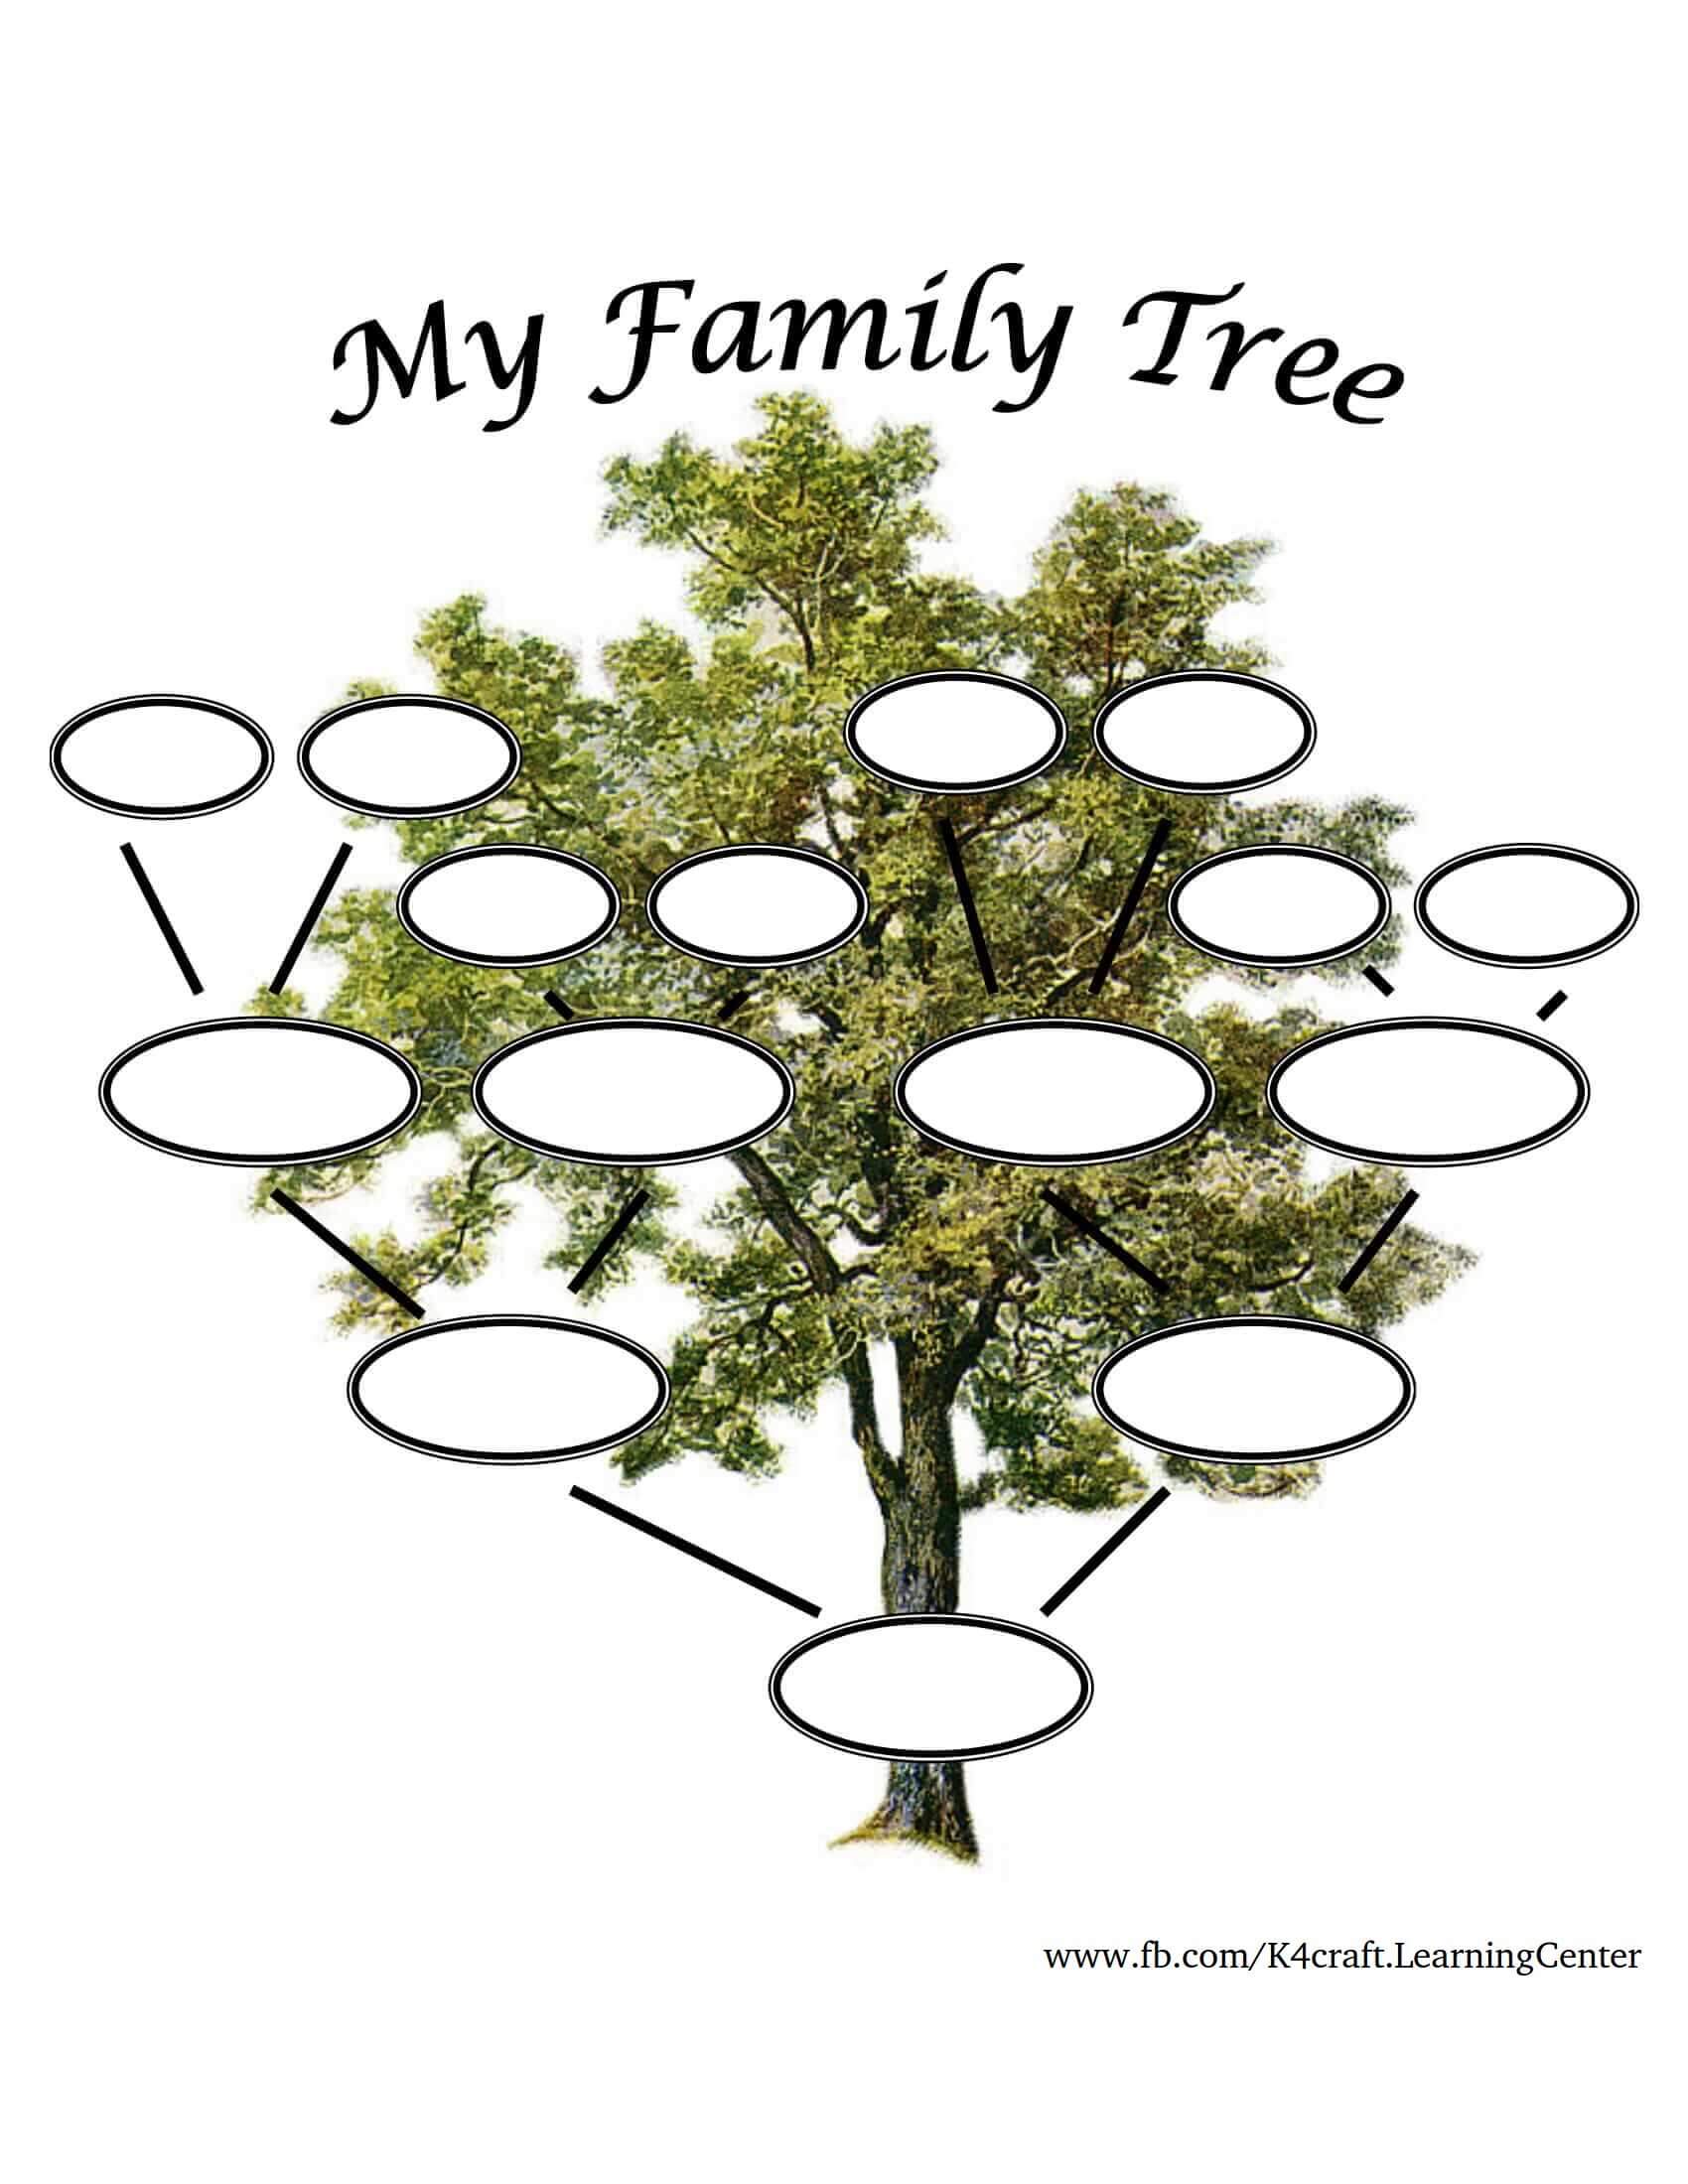 Full Family Tree Template With Oval Circle  - Template varieties for children to assemble their family tree 